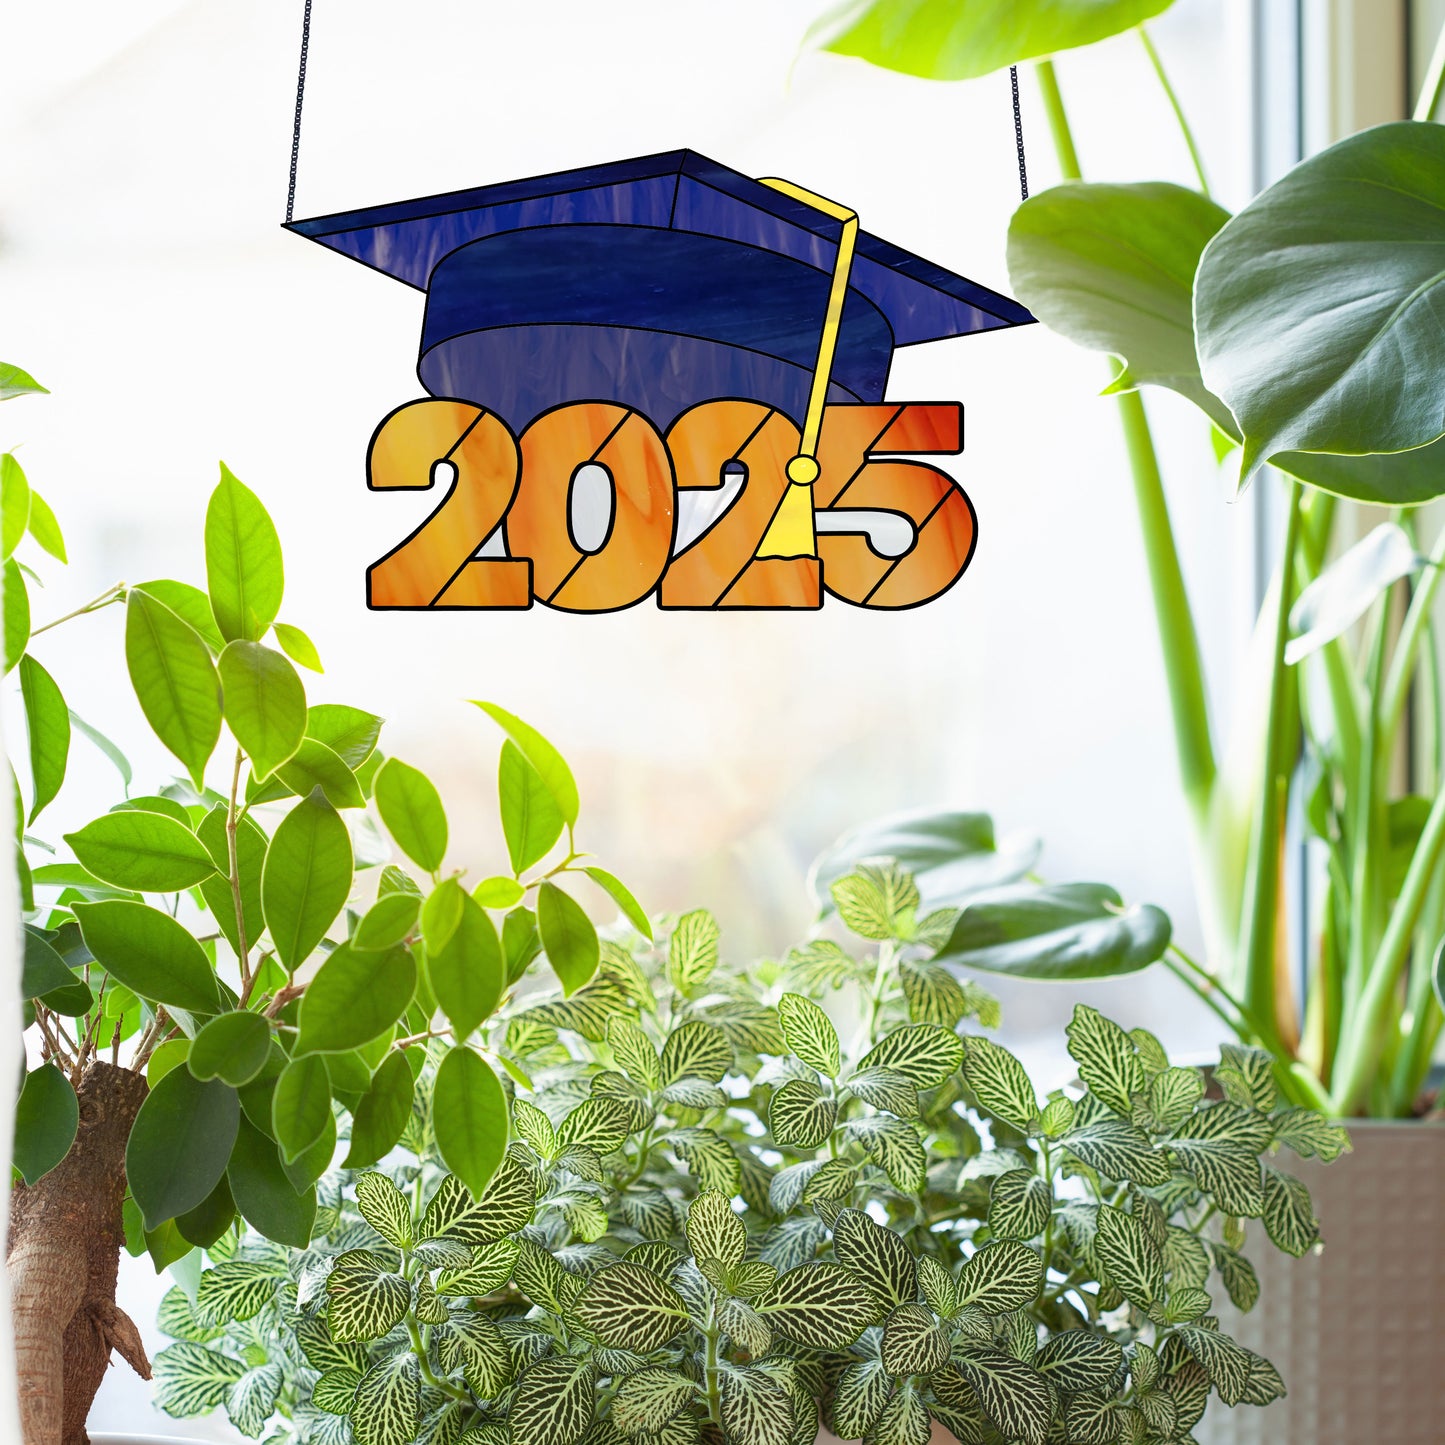 Class of 2025 Graduate Cap Stained Glass Pattern